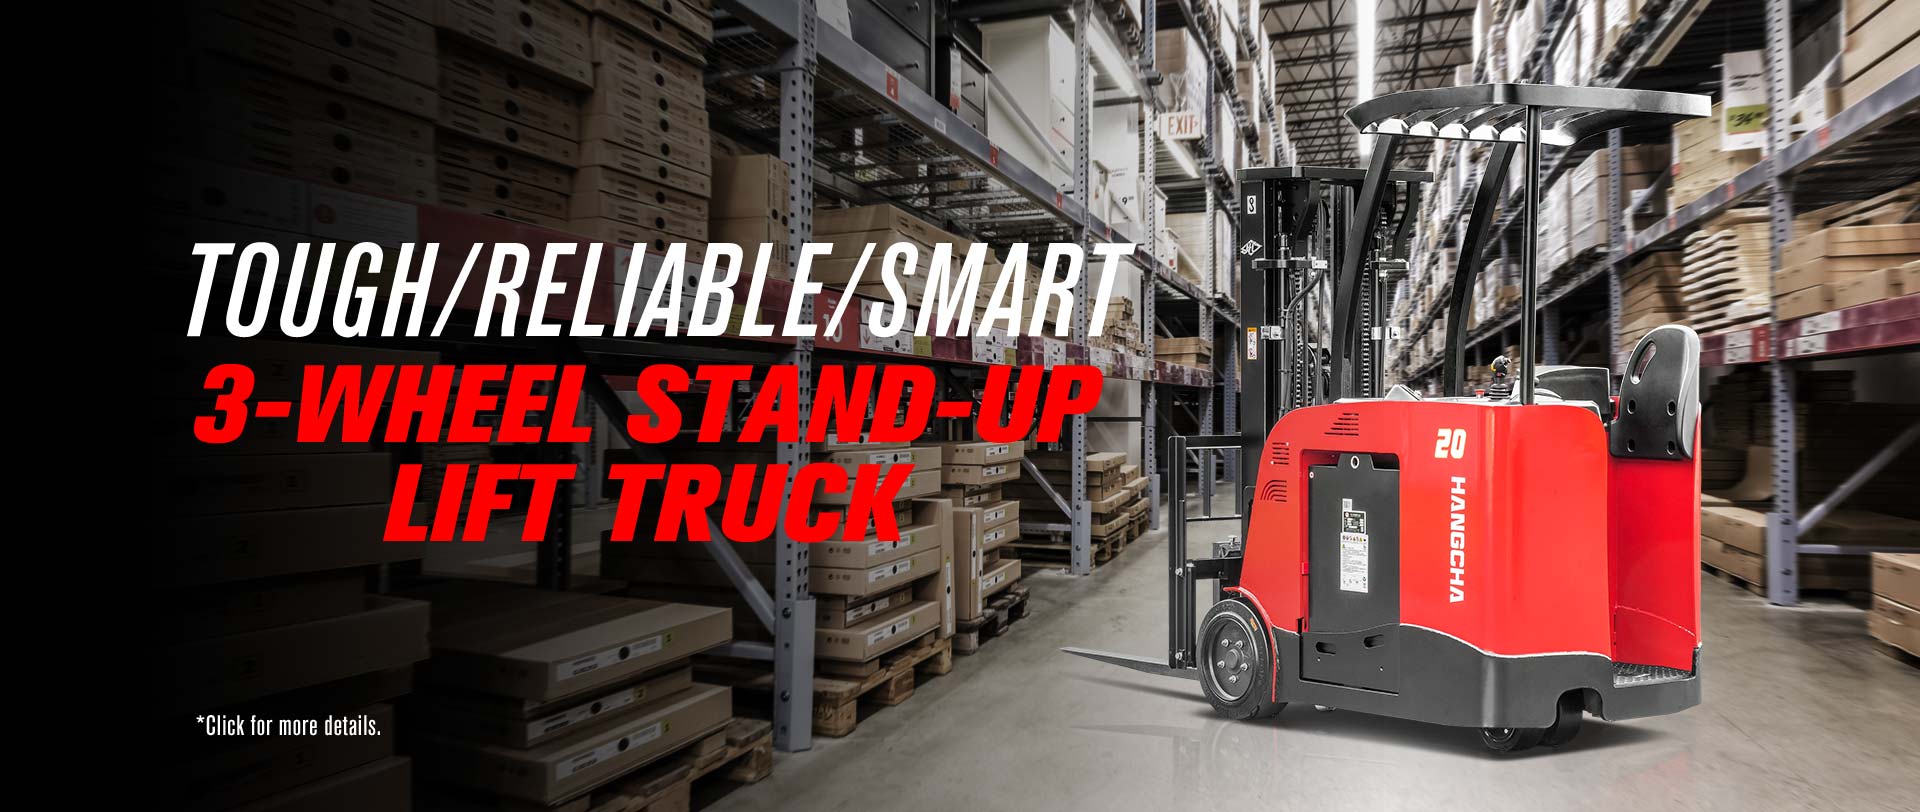 3-Wheel Stand-up Lift Truck